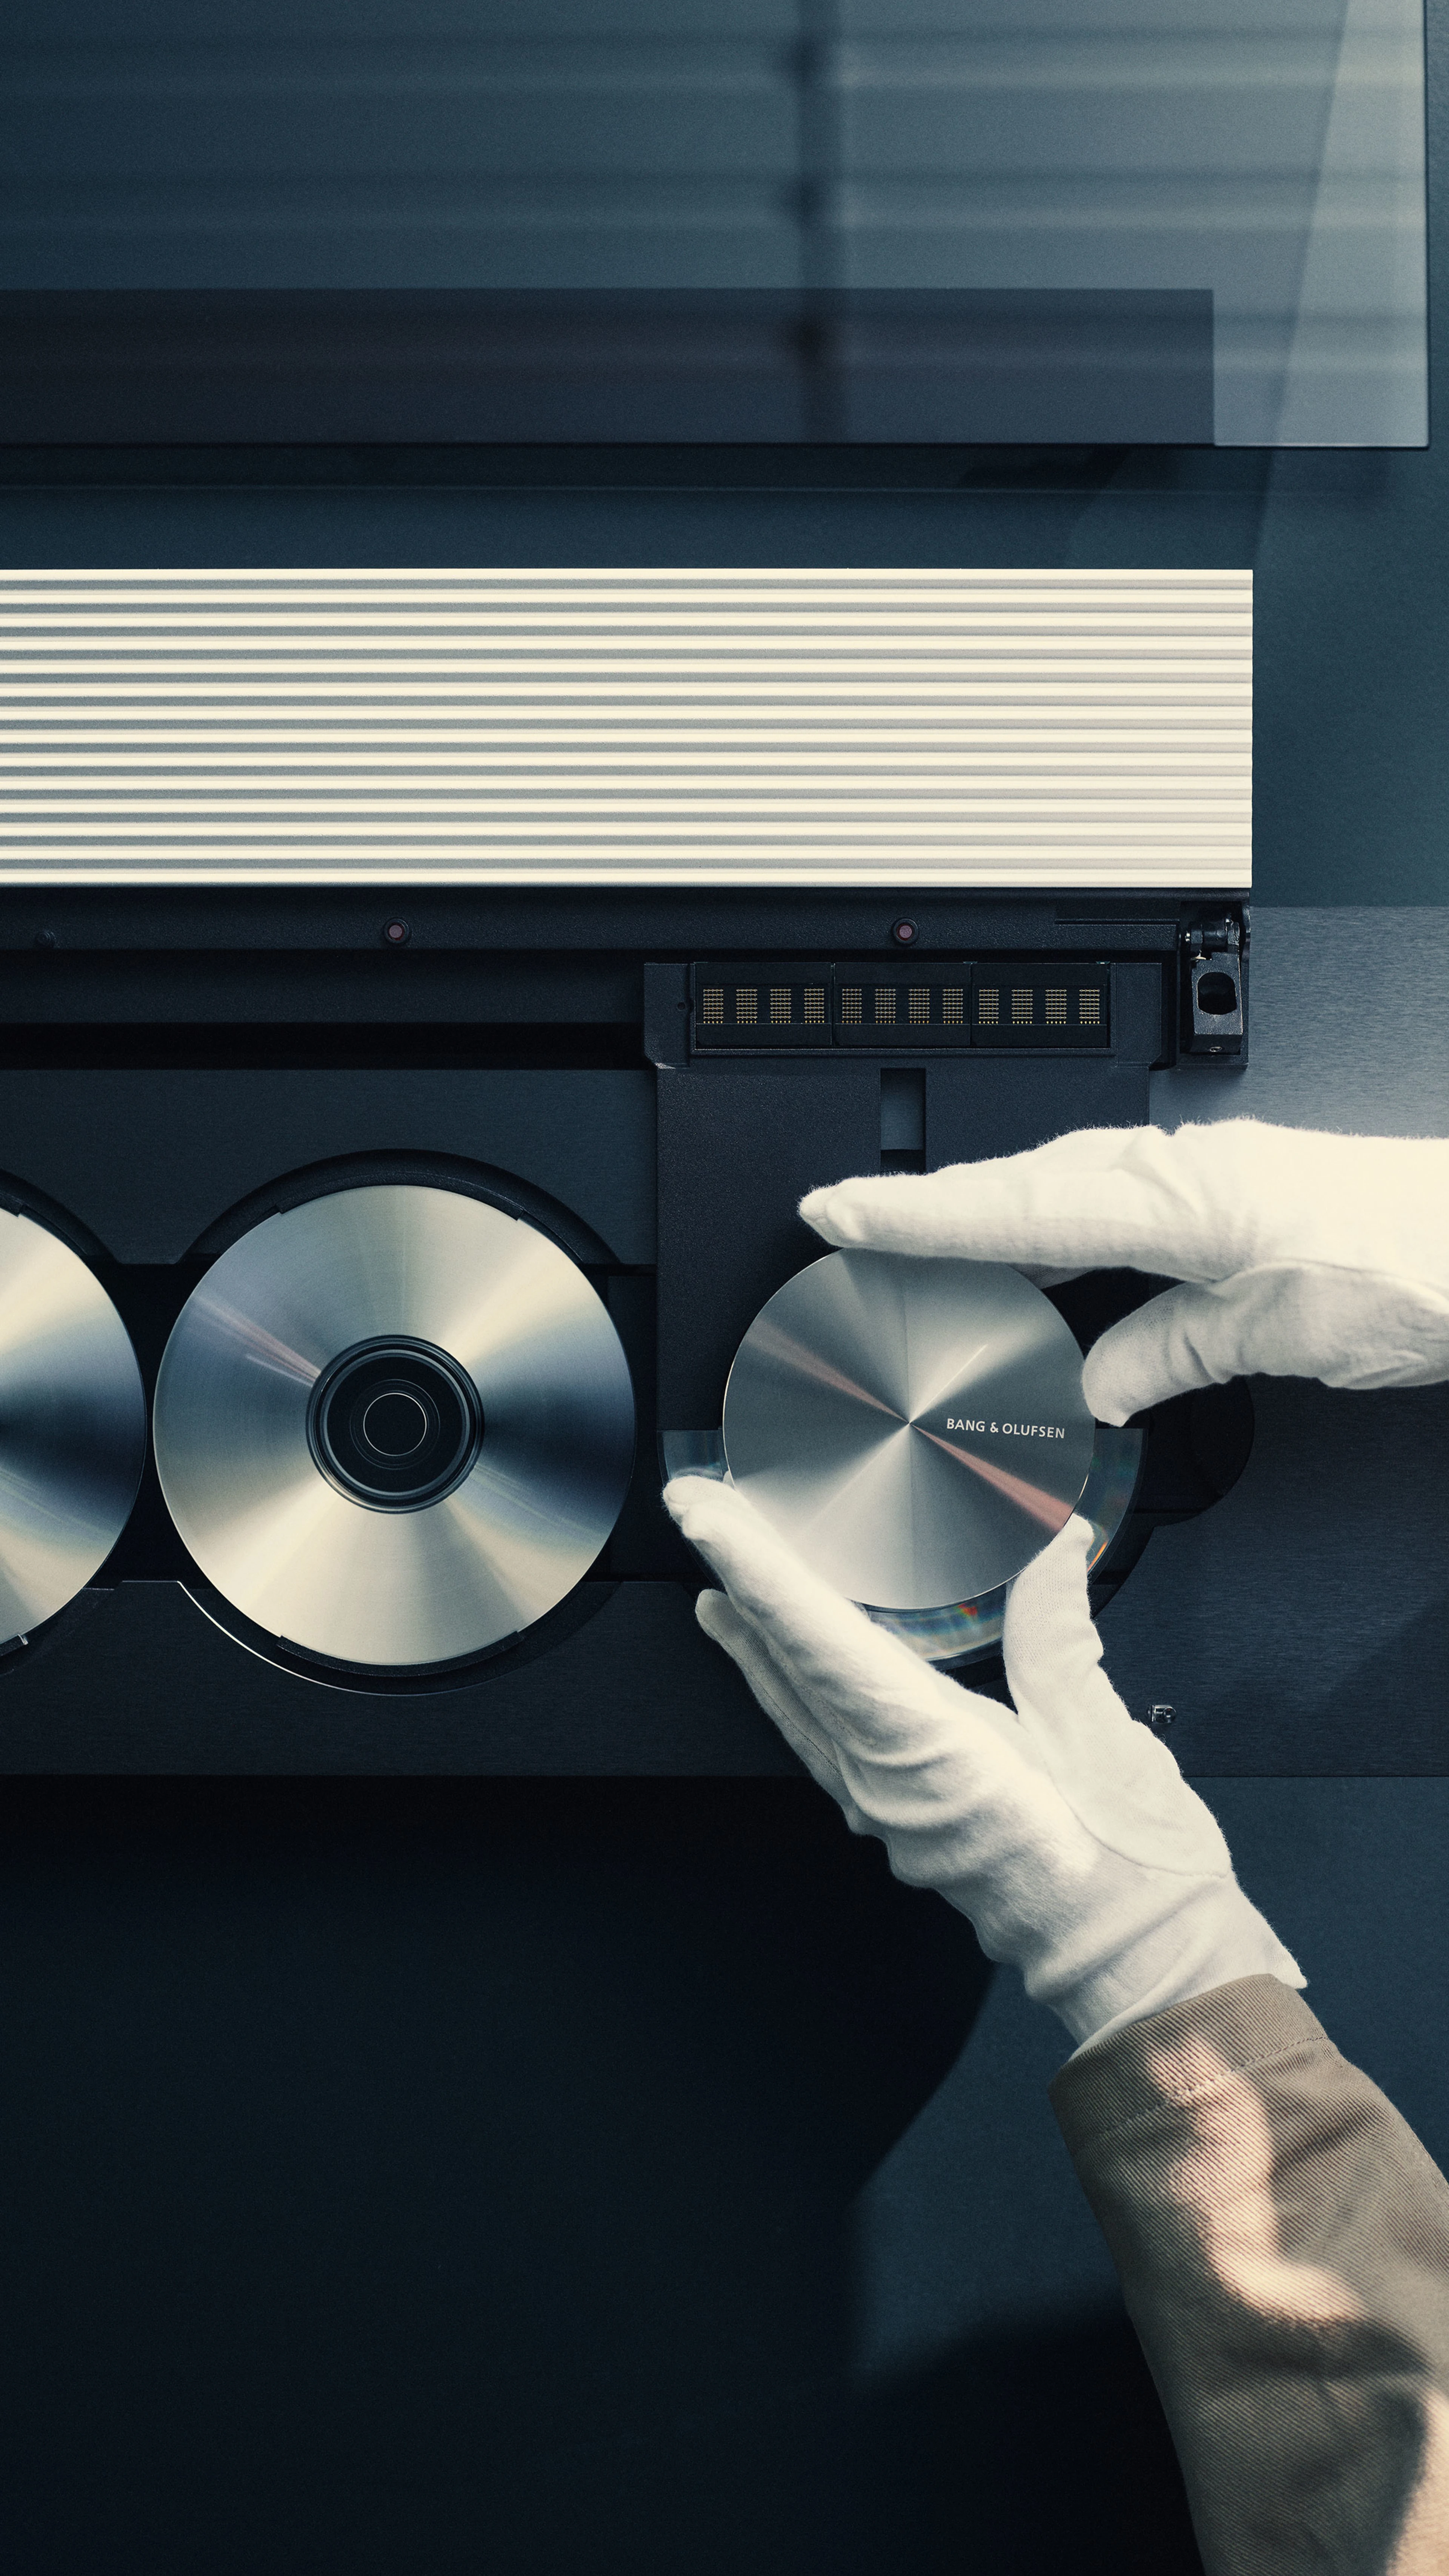 Detail image of a pair of hands in white gloves adjusting a Beosound 9000 CD player recreated as the Beosystem 9000c in Factory 3, Struer